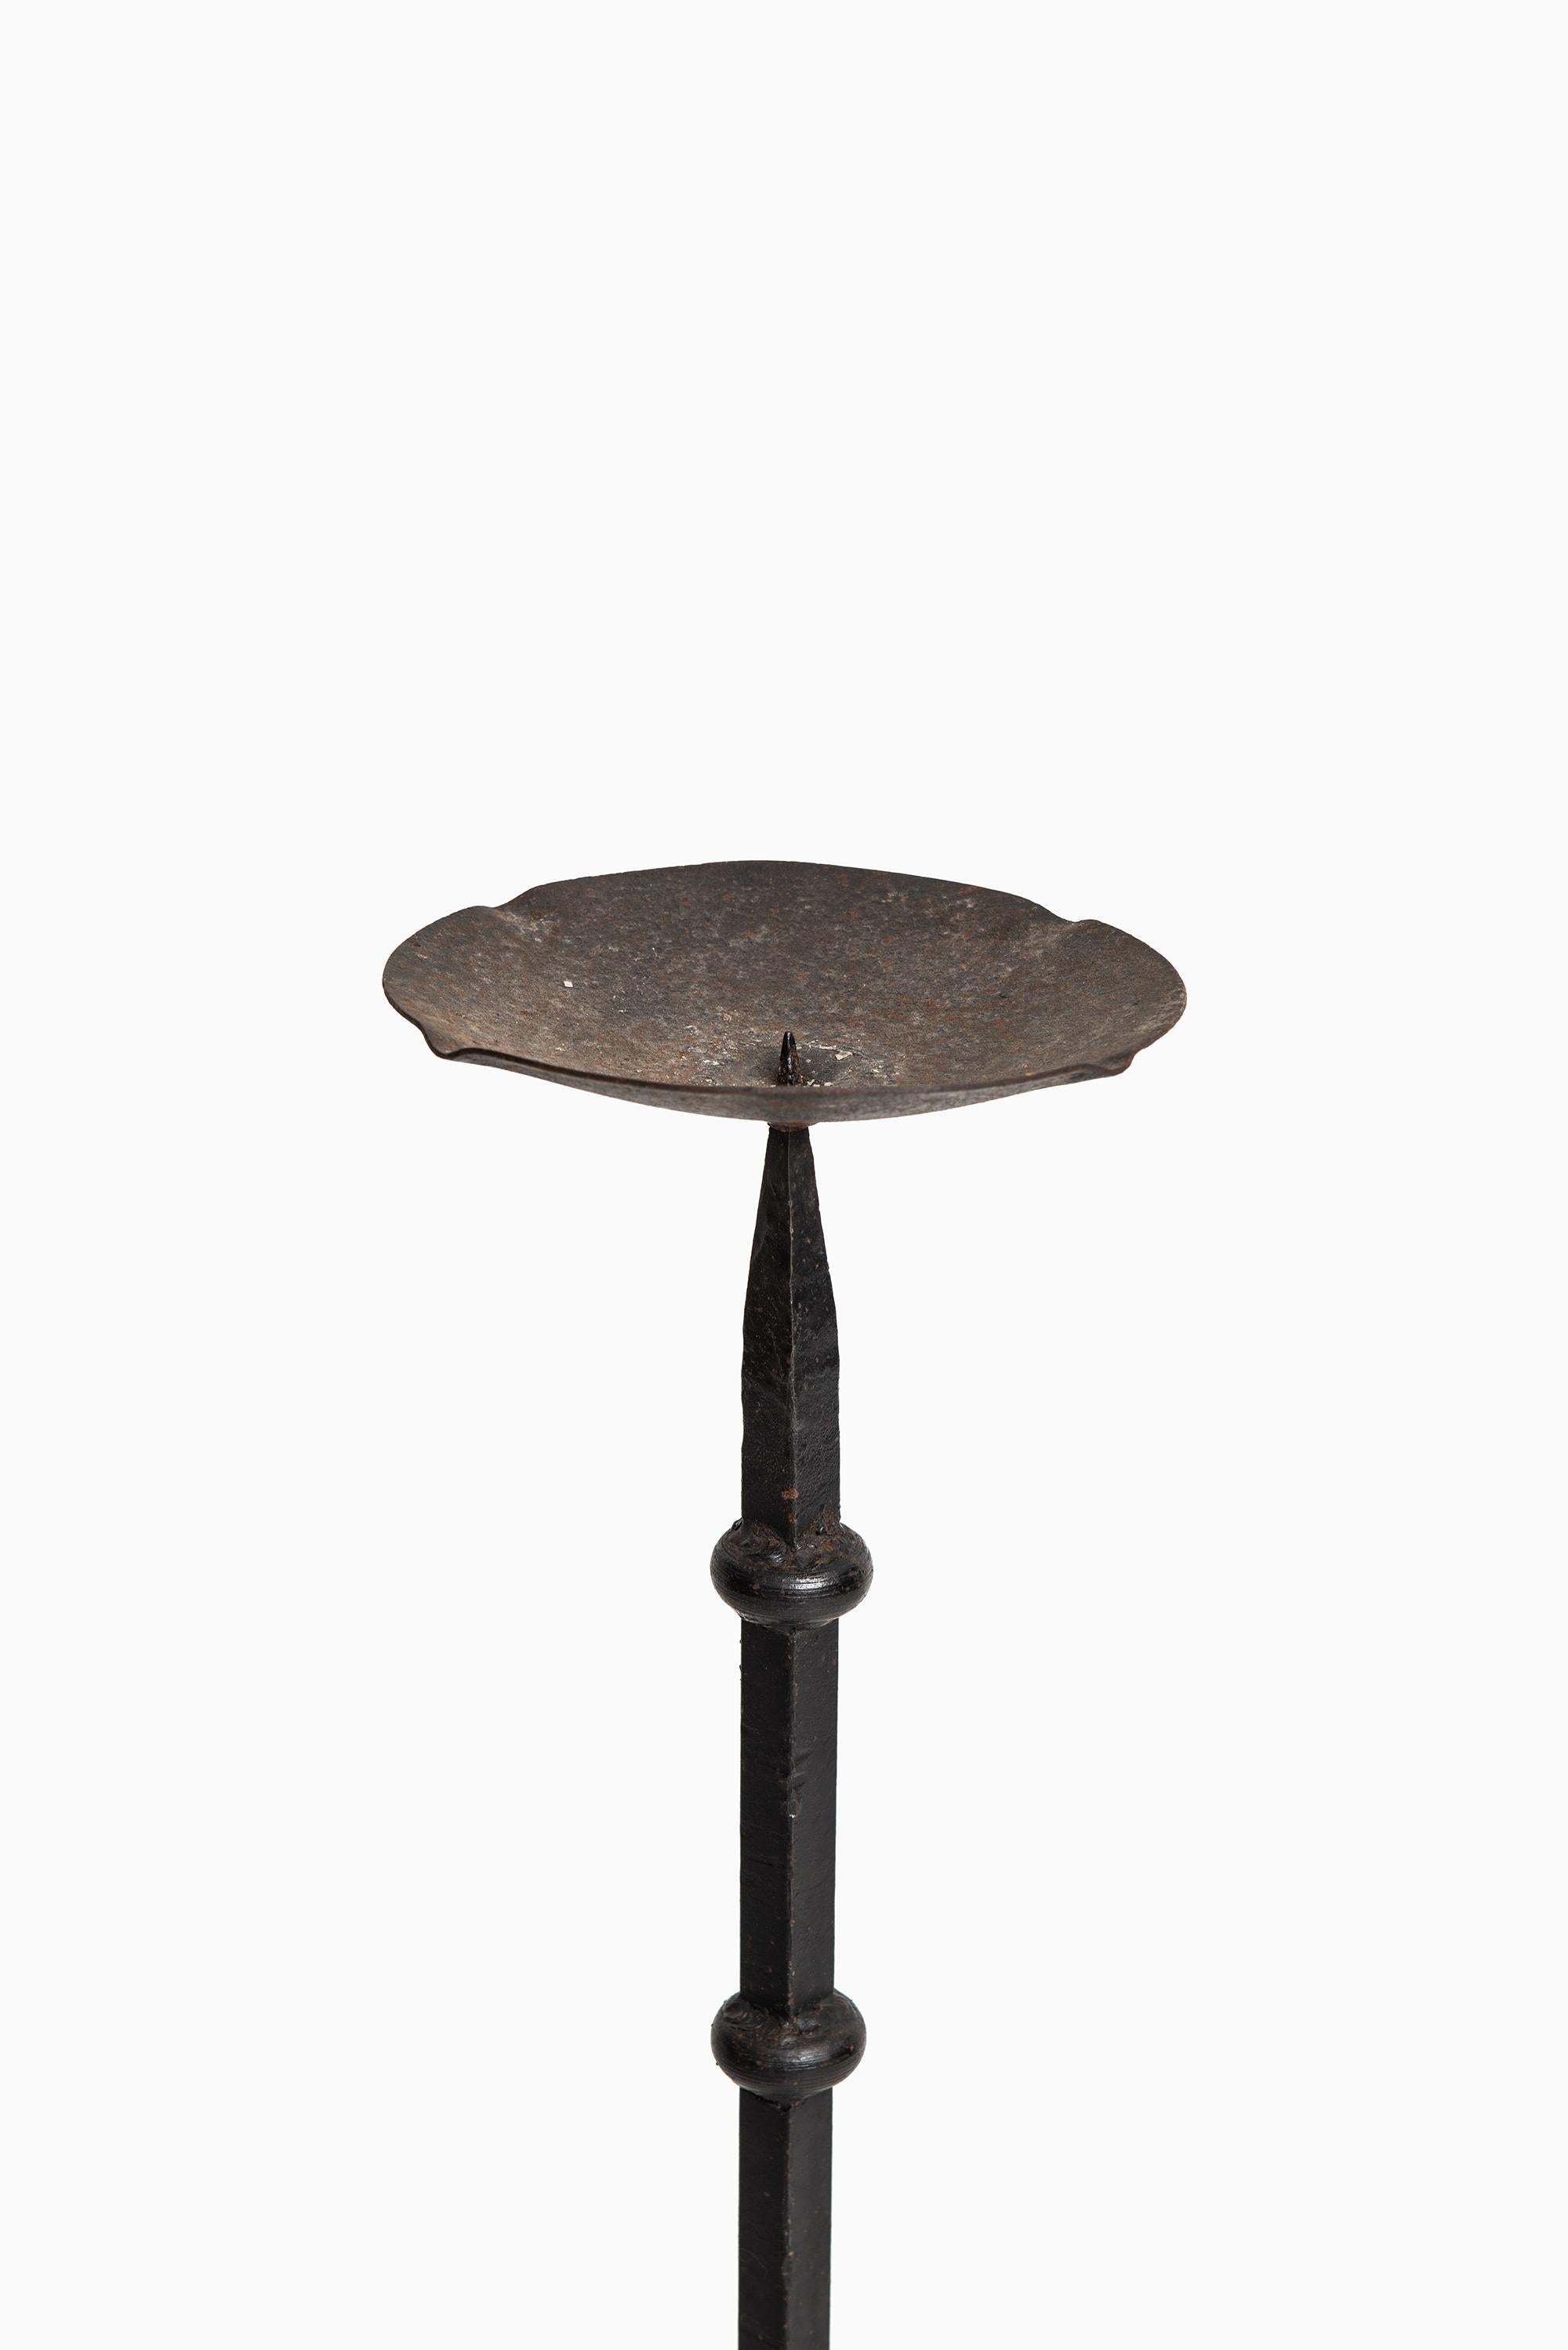 Rare large candlestick in wrought iron. Produced in Sweden.